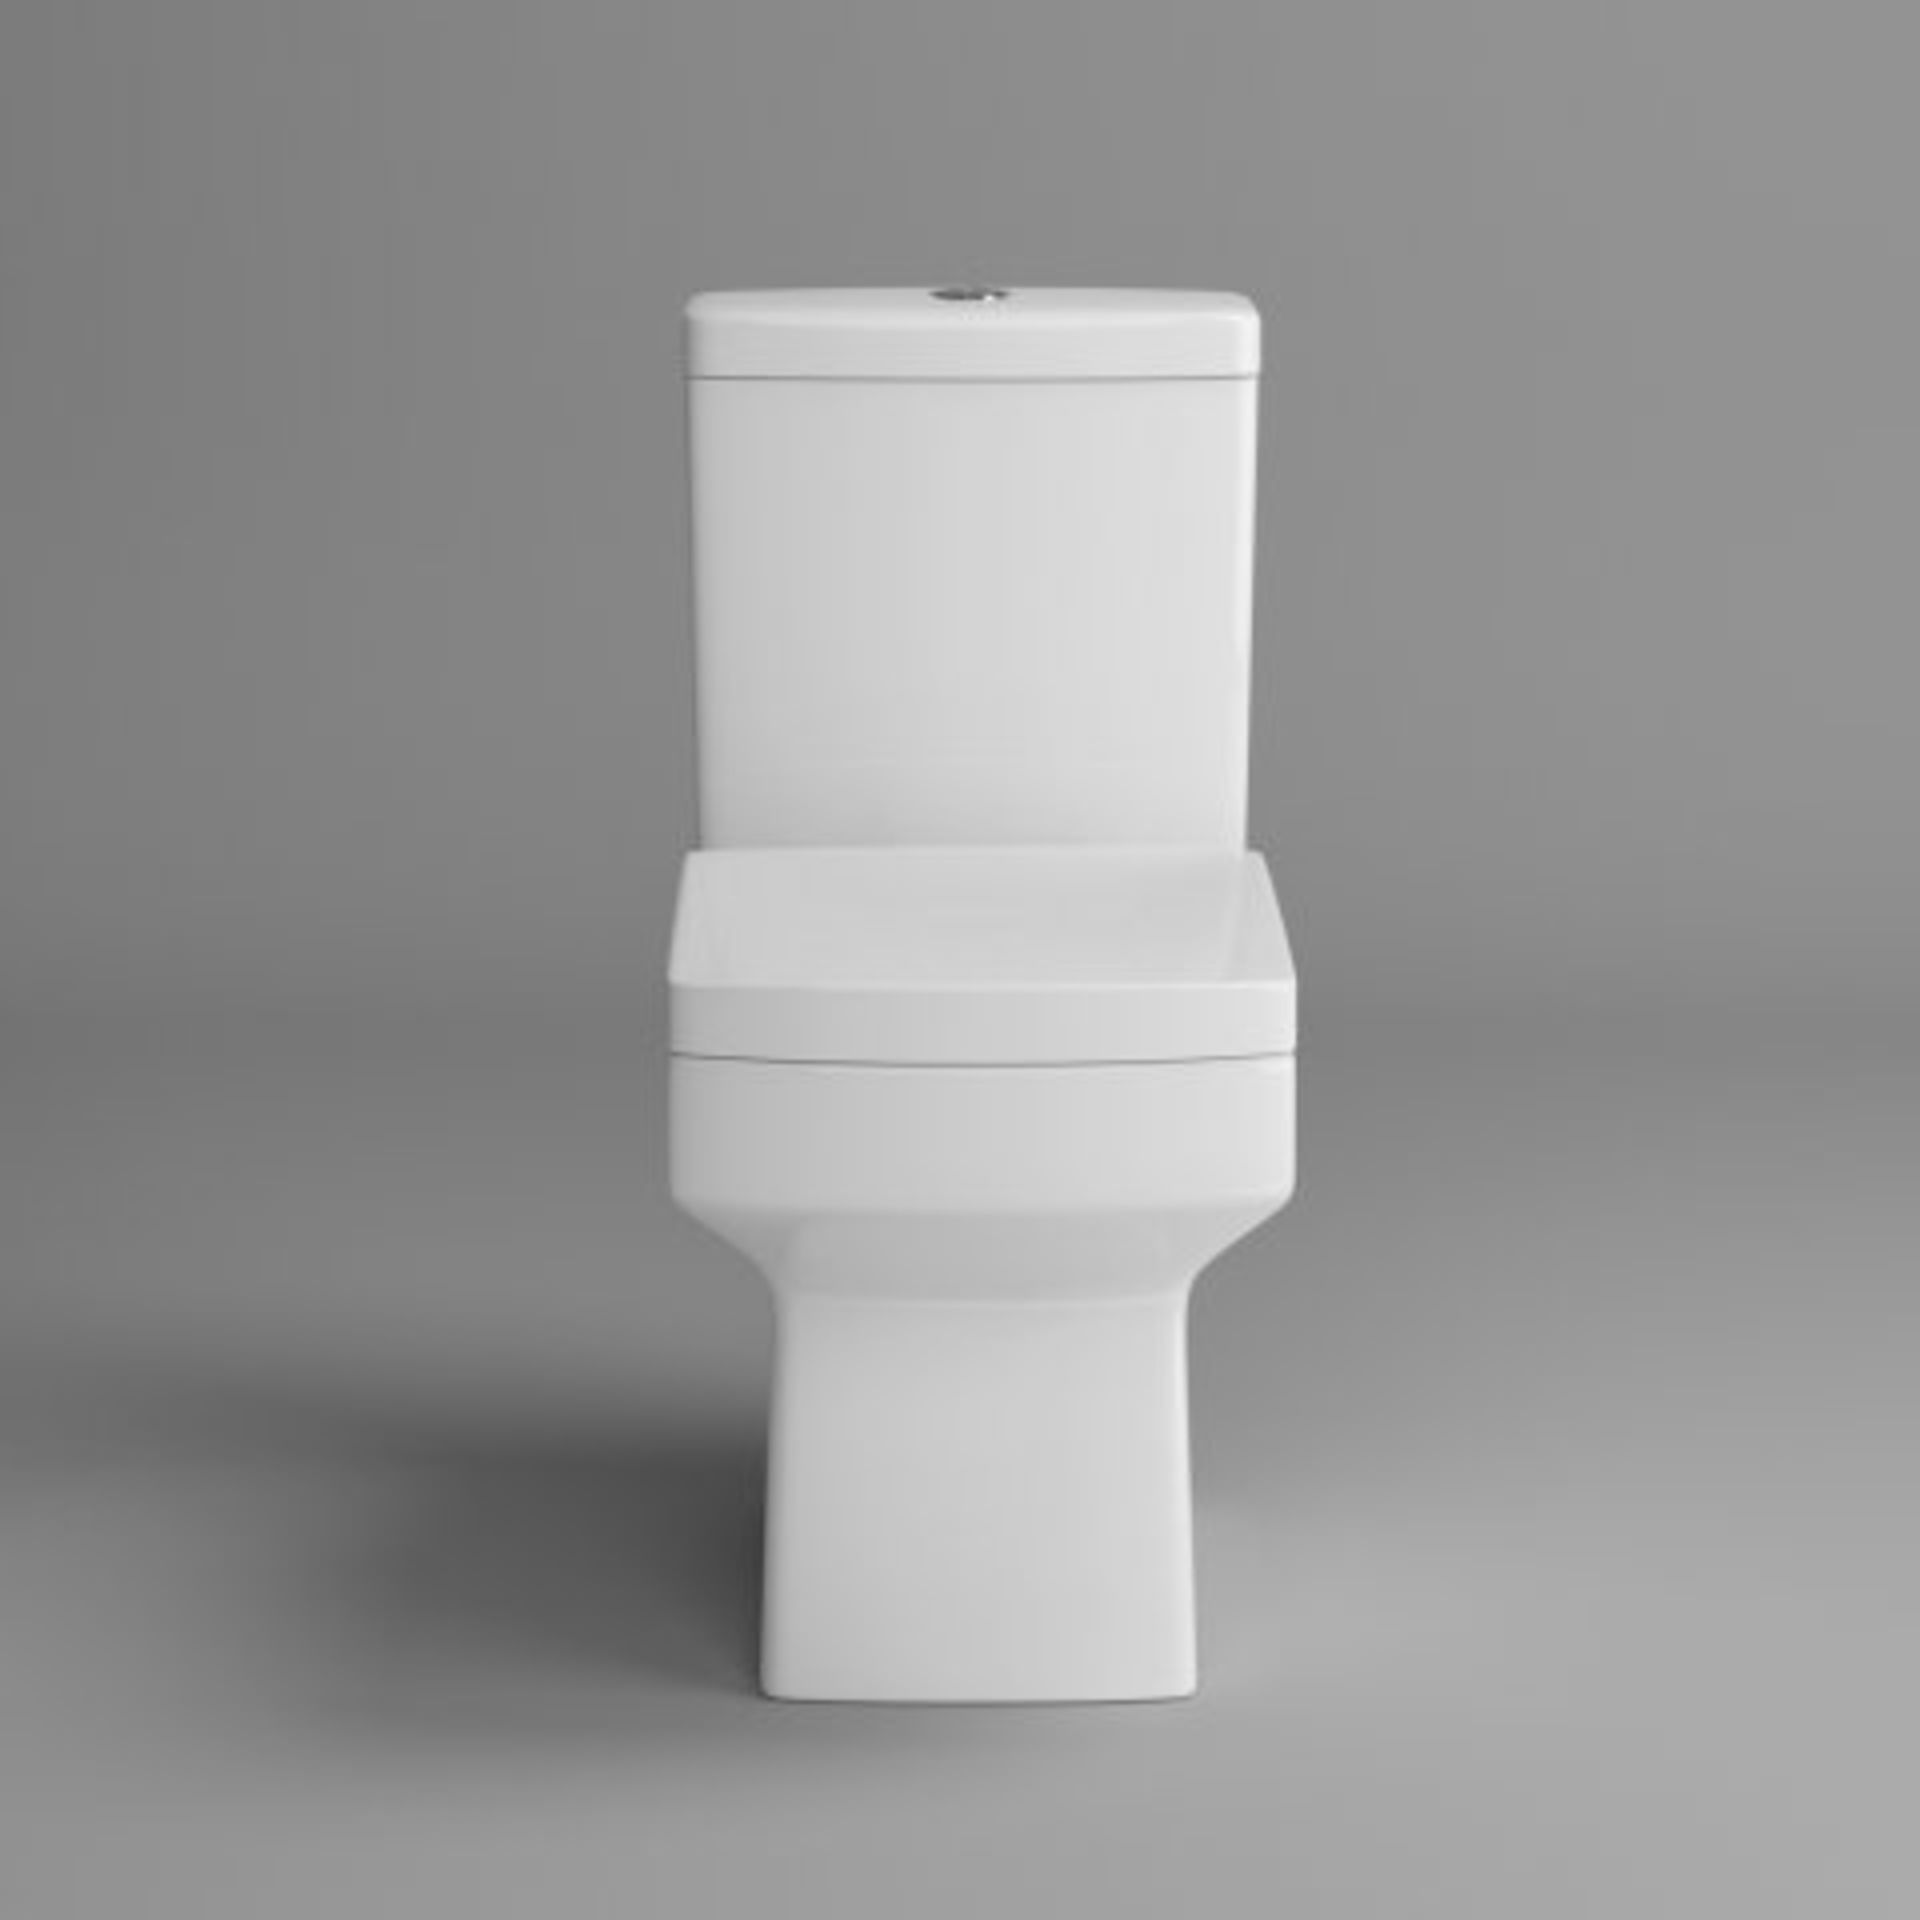 New Belfort Close Coupled Toilet RRP £549.99 Manufactured From High Quality White Vitreous Chi... - Image 2 of 2